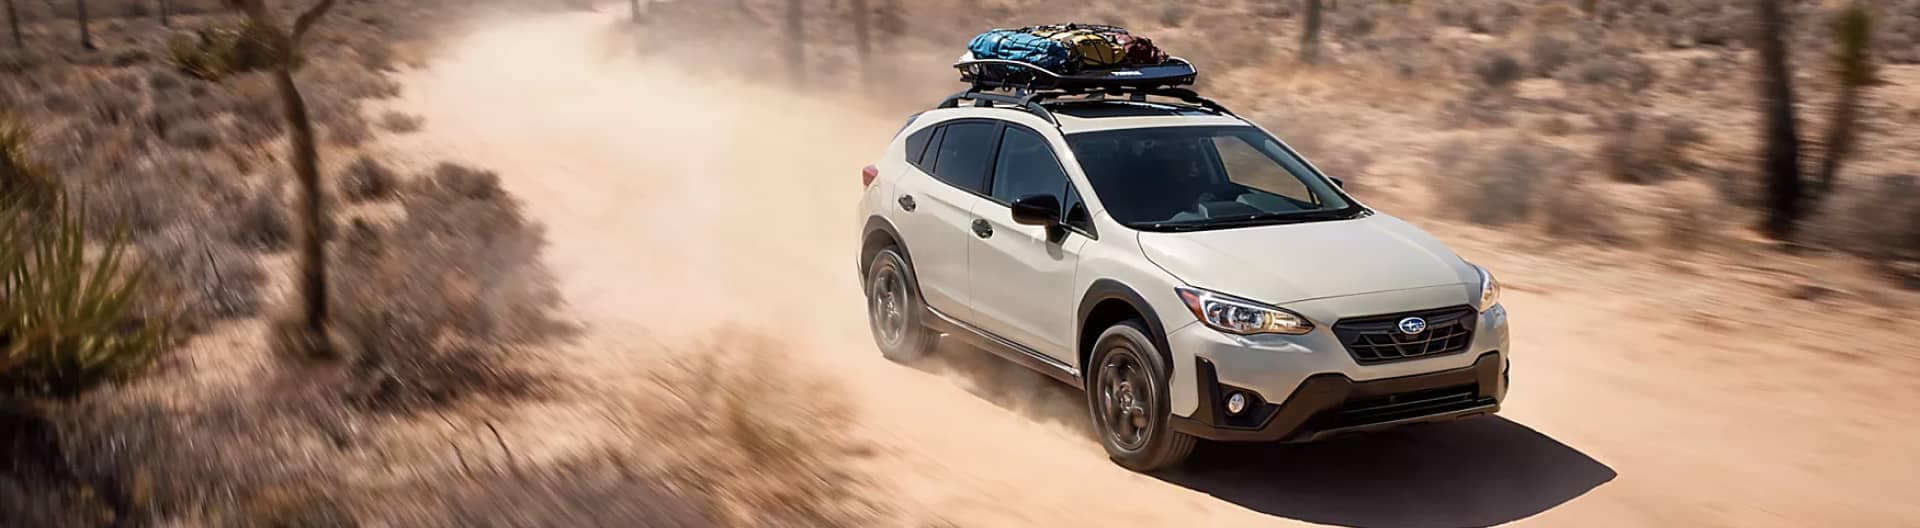 An exterior view of a Subaru Outback on a desert road